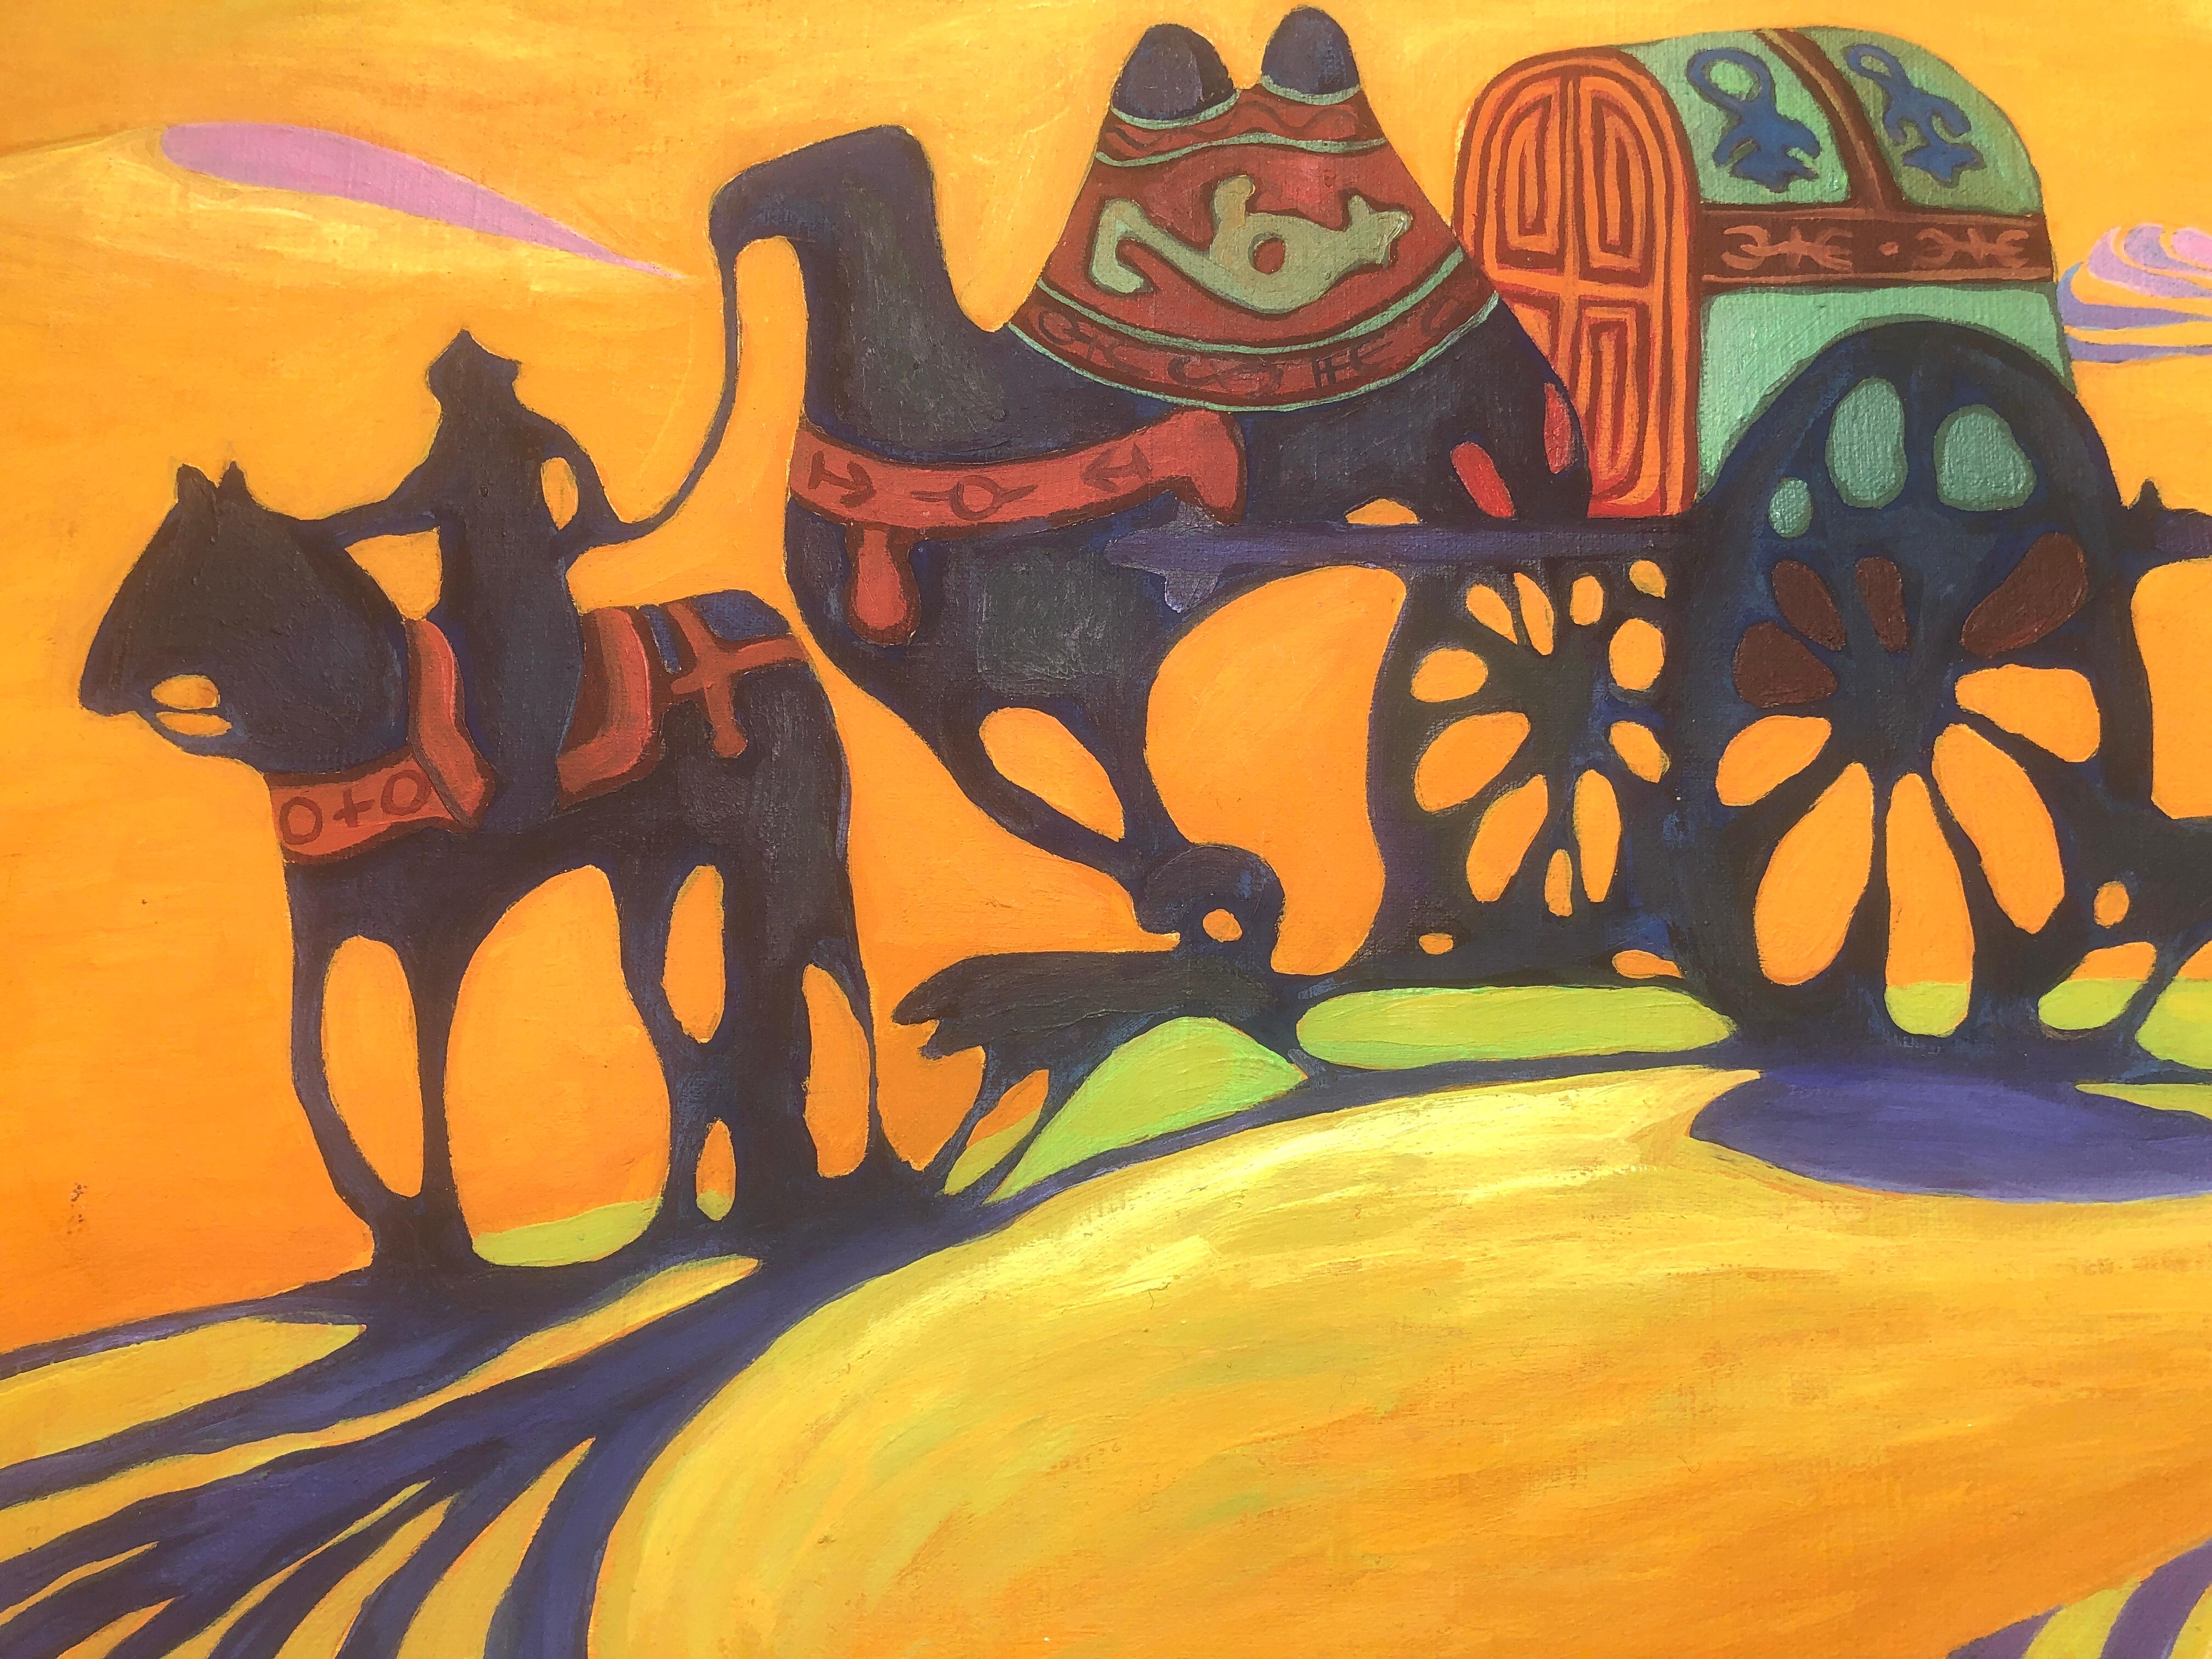 tsegmed tserennadmid (1958) - Mongolian Caravan - Oil on canvas

Birth: 1958
Country of birth: Mongolia
Lives in: Mongolia

Born in 1958 in Ulaanbaatar, Mongolia, and educated in both Mongolia and Russia, Tsegmed has been the President of the